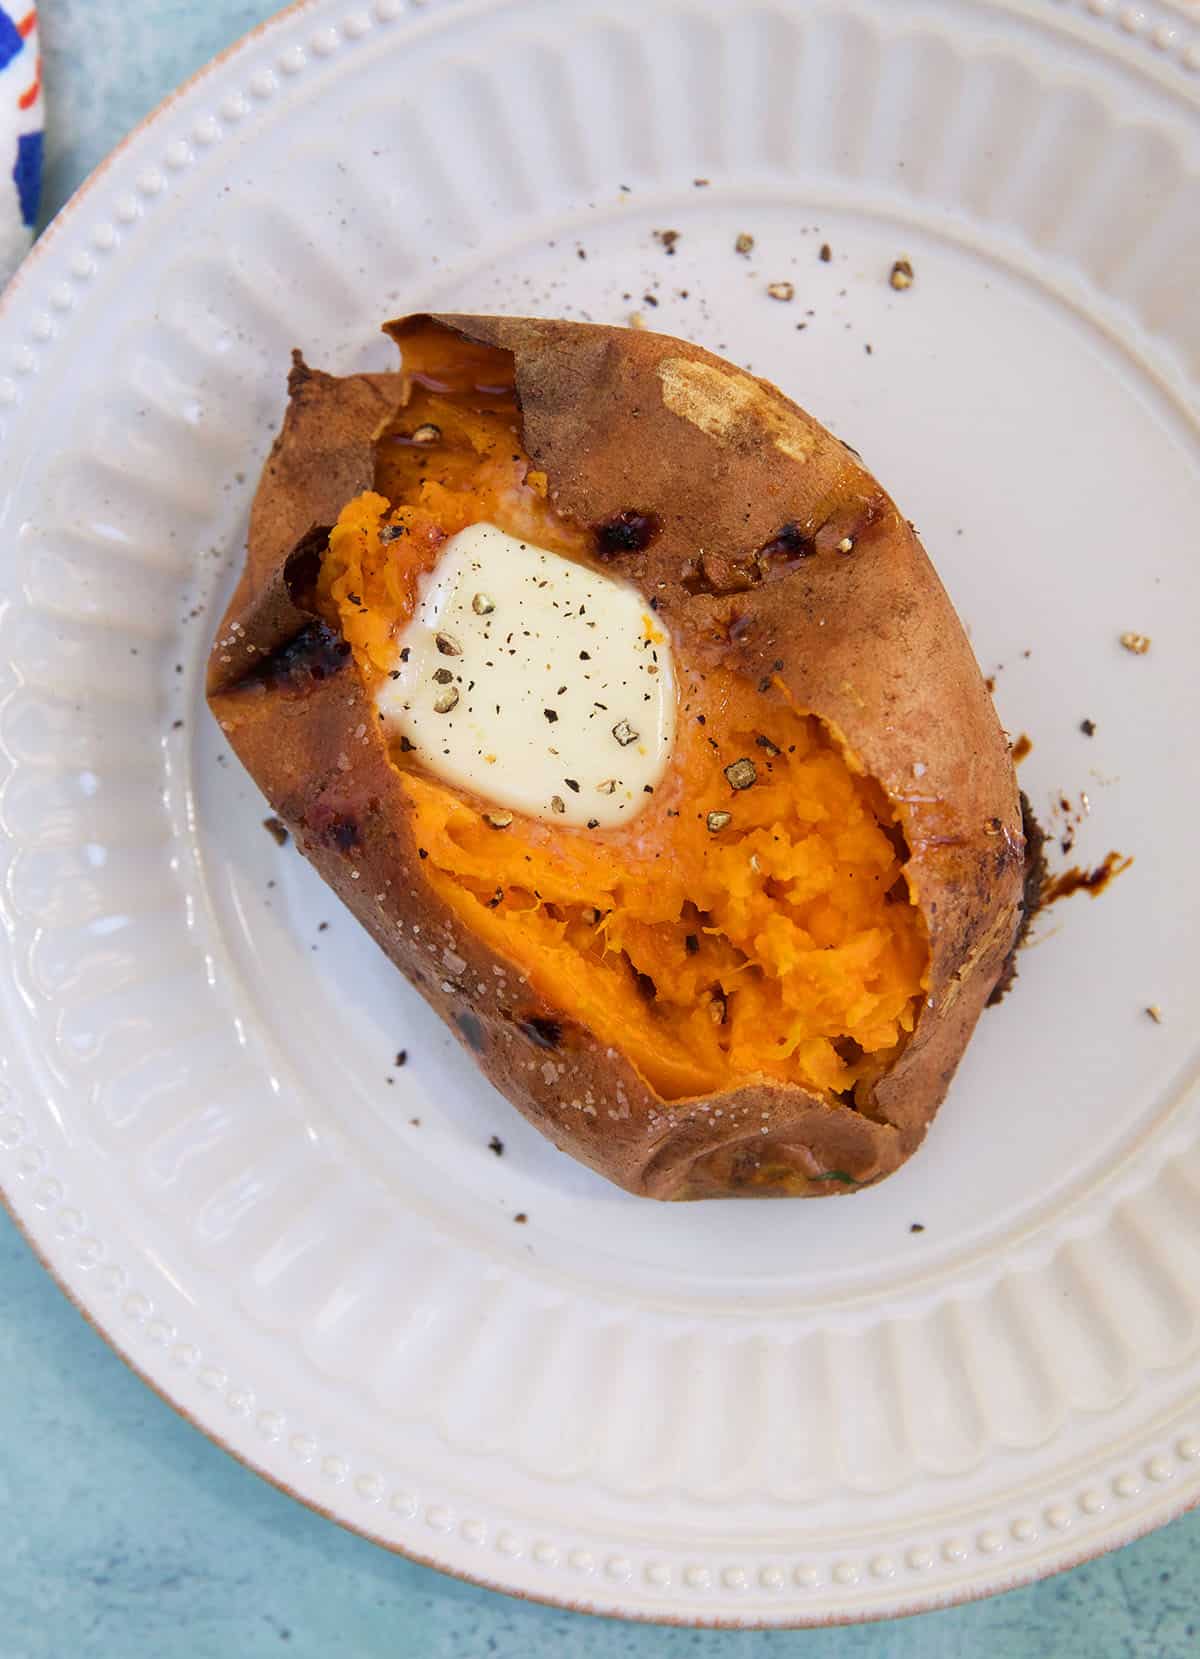 A cooked sweet potato is sliced and topped with butter and black pepper.